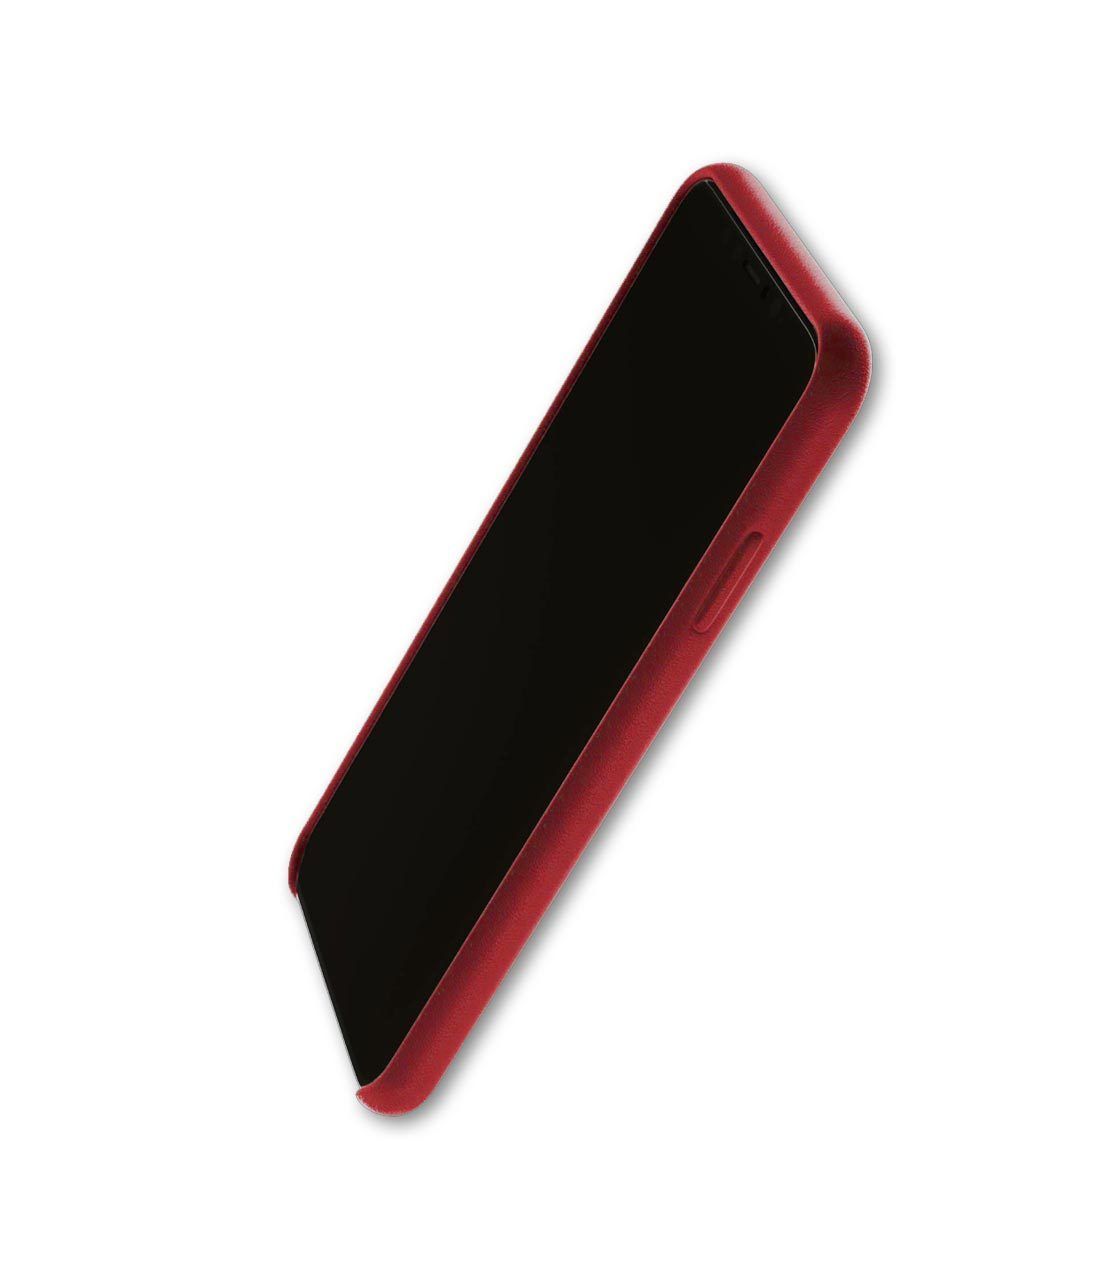 Leather Phone Case Red - Leather Phone Case for iPhone 11 Pro Max